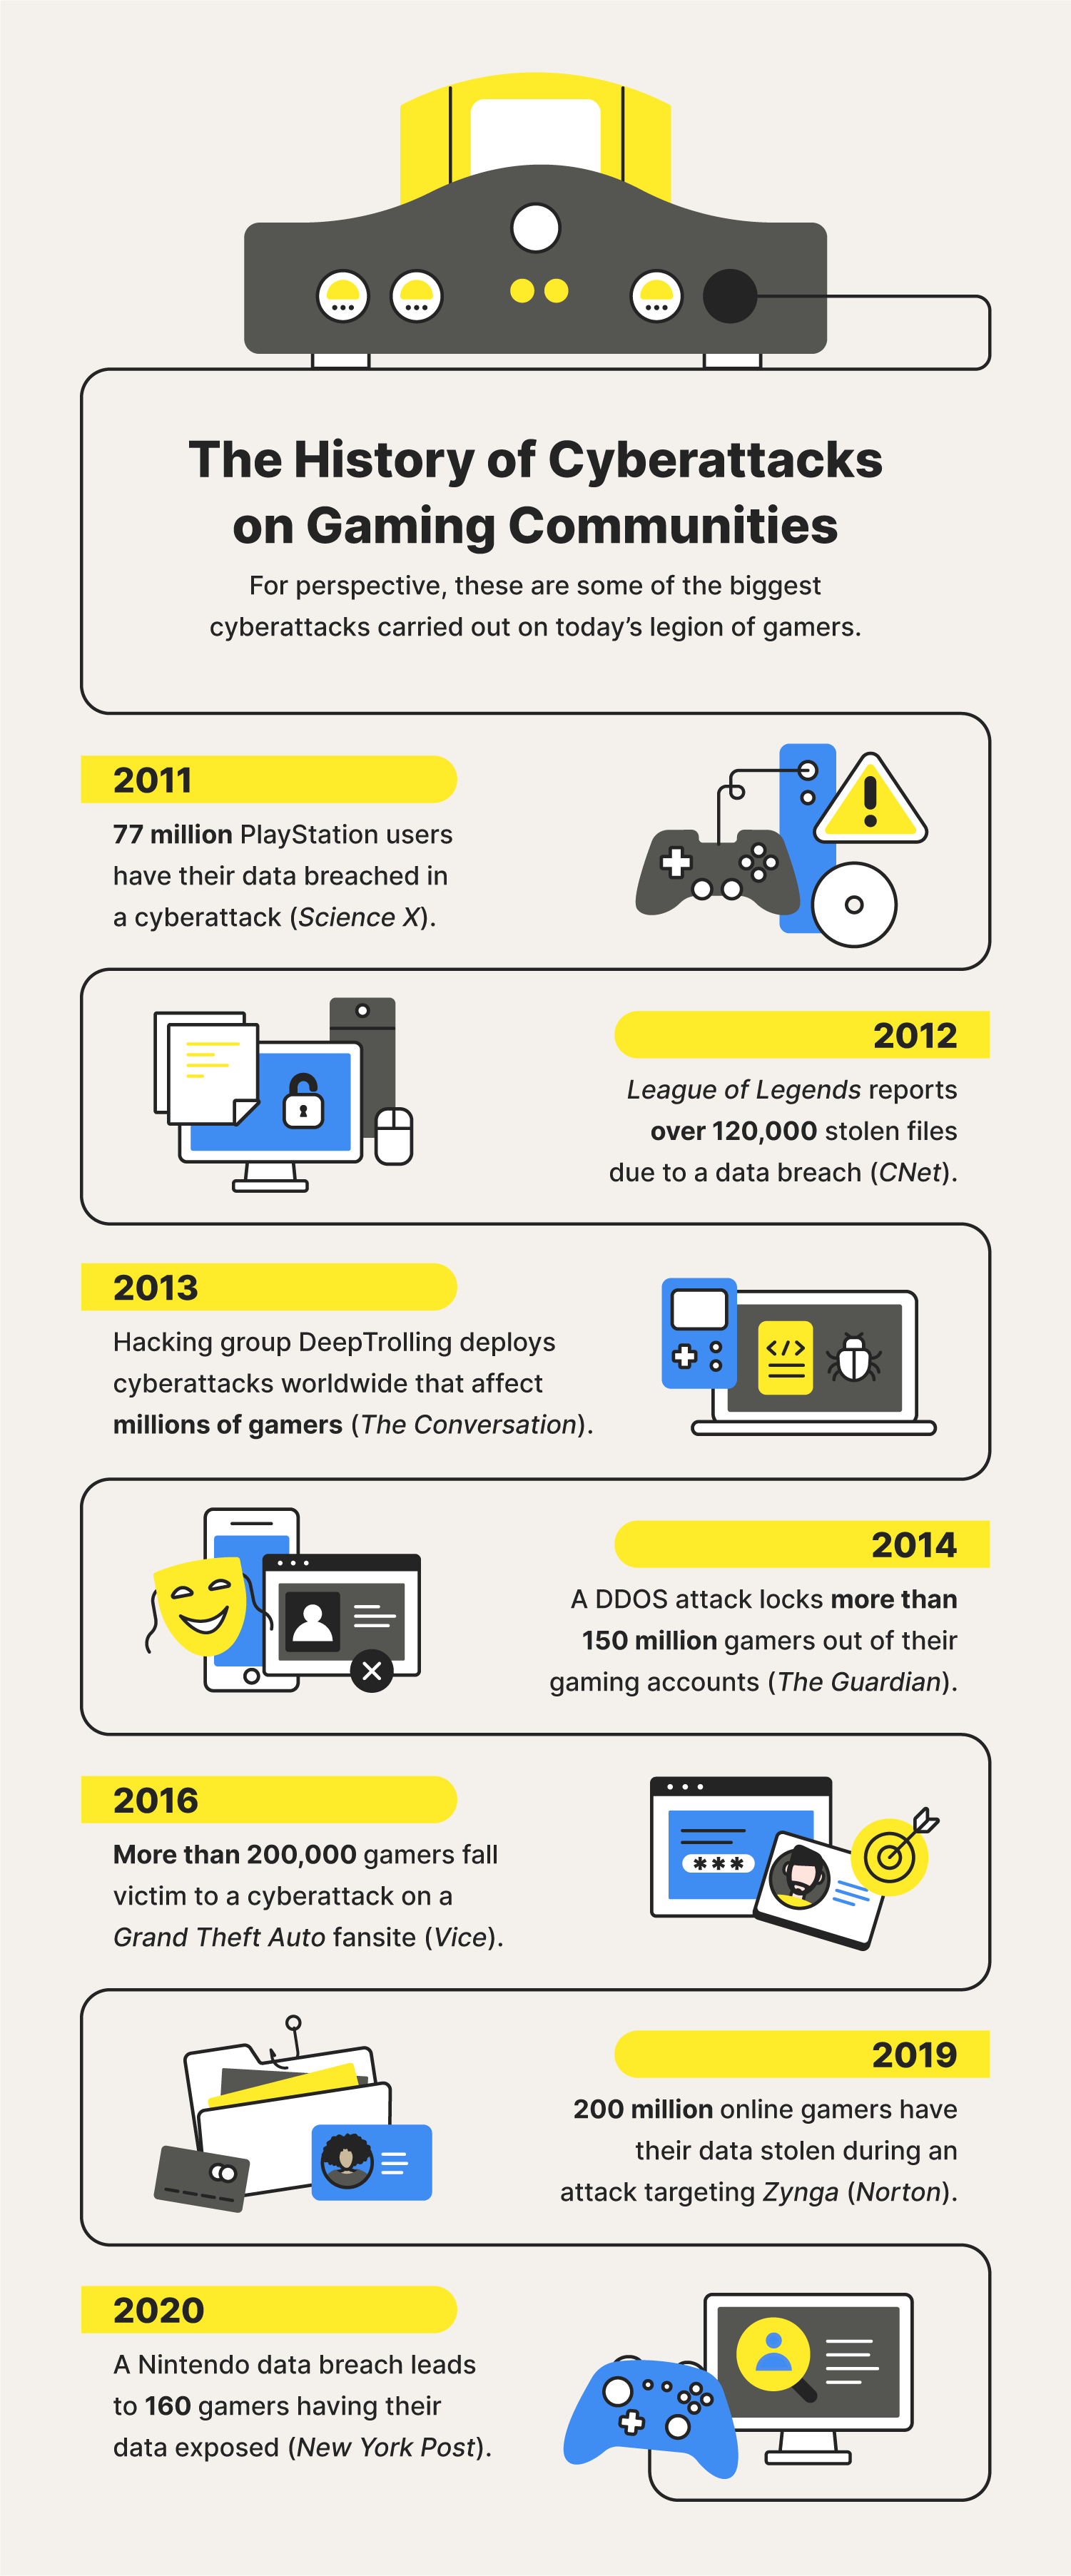 A timeline depicts the most significant gaming cyberattacks in recent years, underscoring the importance of cybersecurity when exploring new video game trends. 